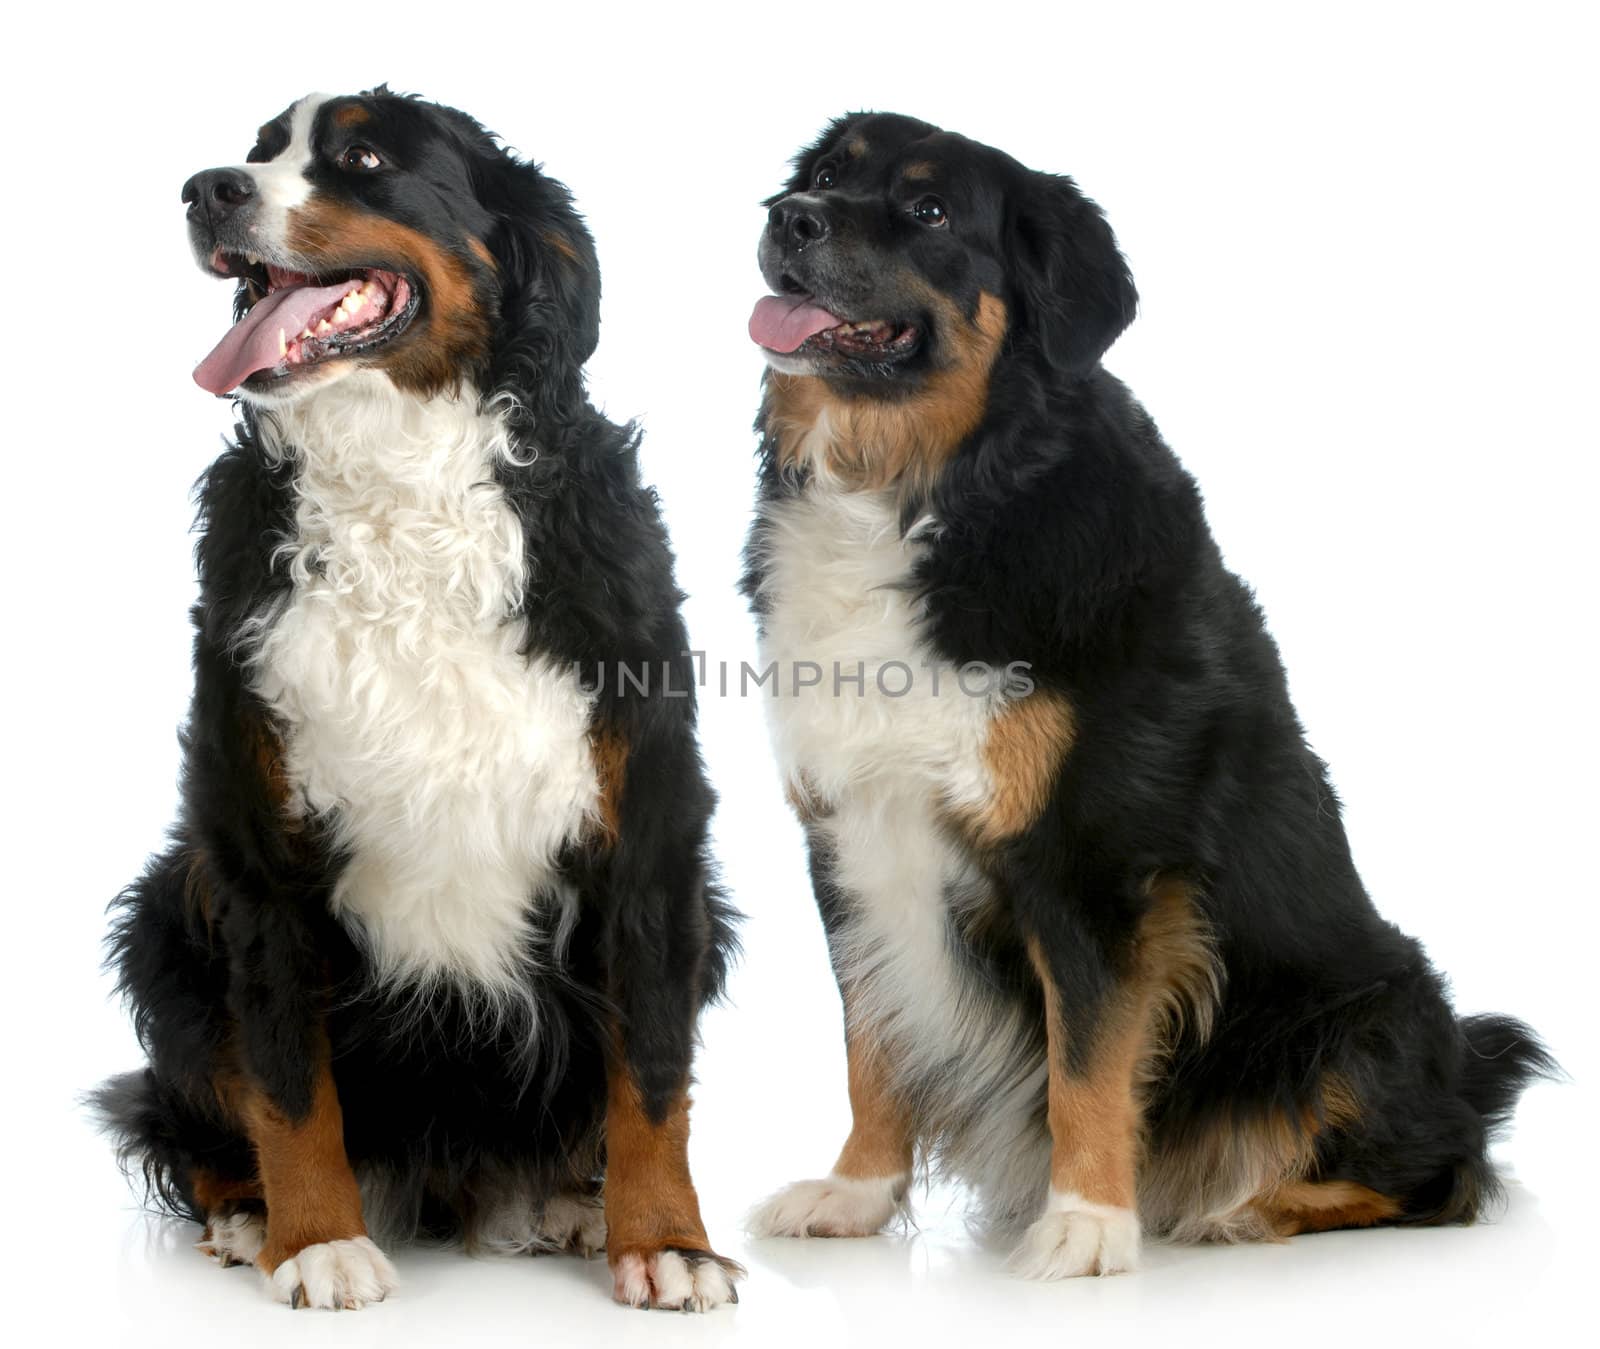 two big dogs - bernese mountain dog type dogs sitting looking up on white background